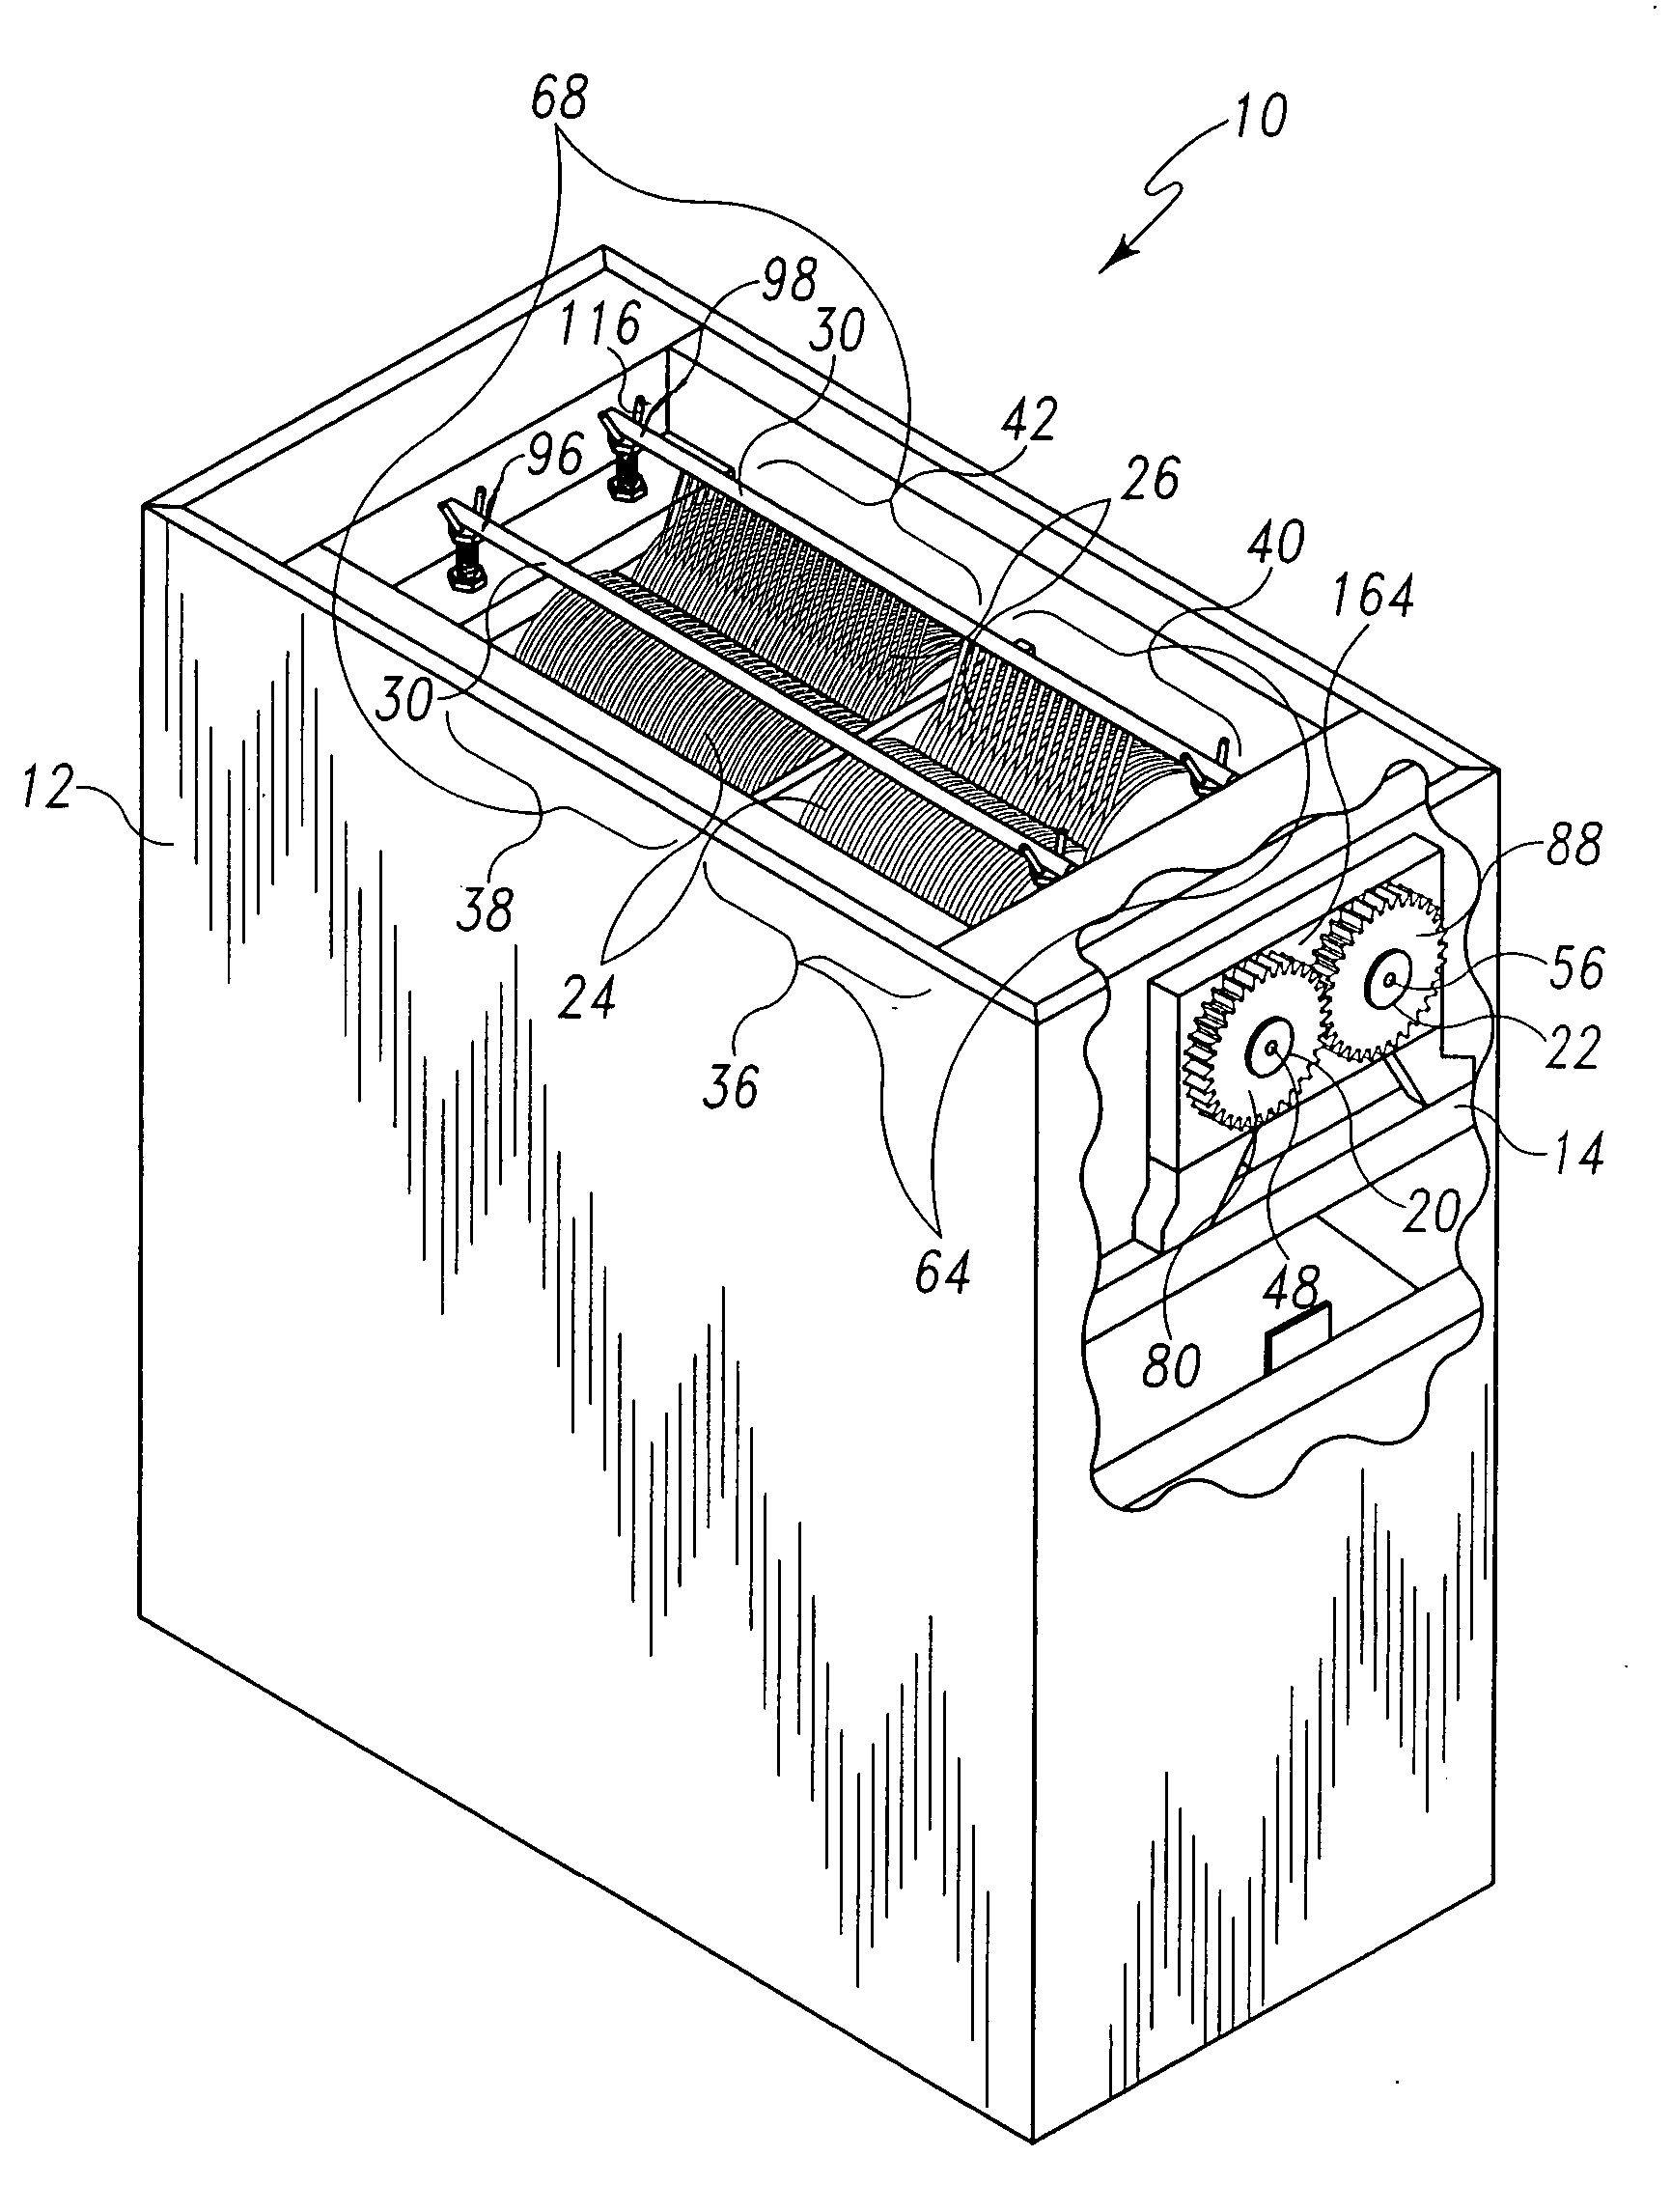 Food processing apparatus for forming strips, slices and cubes